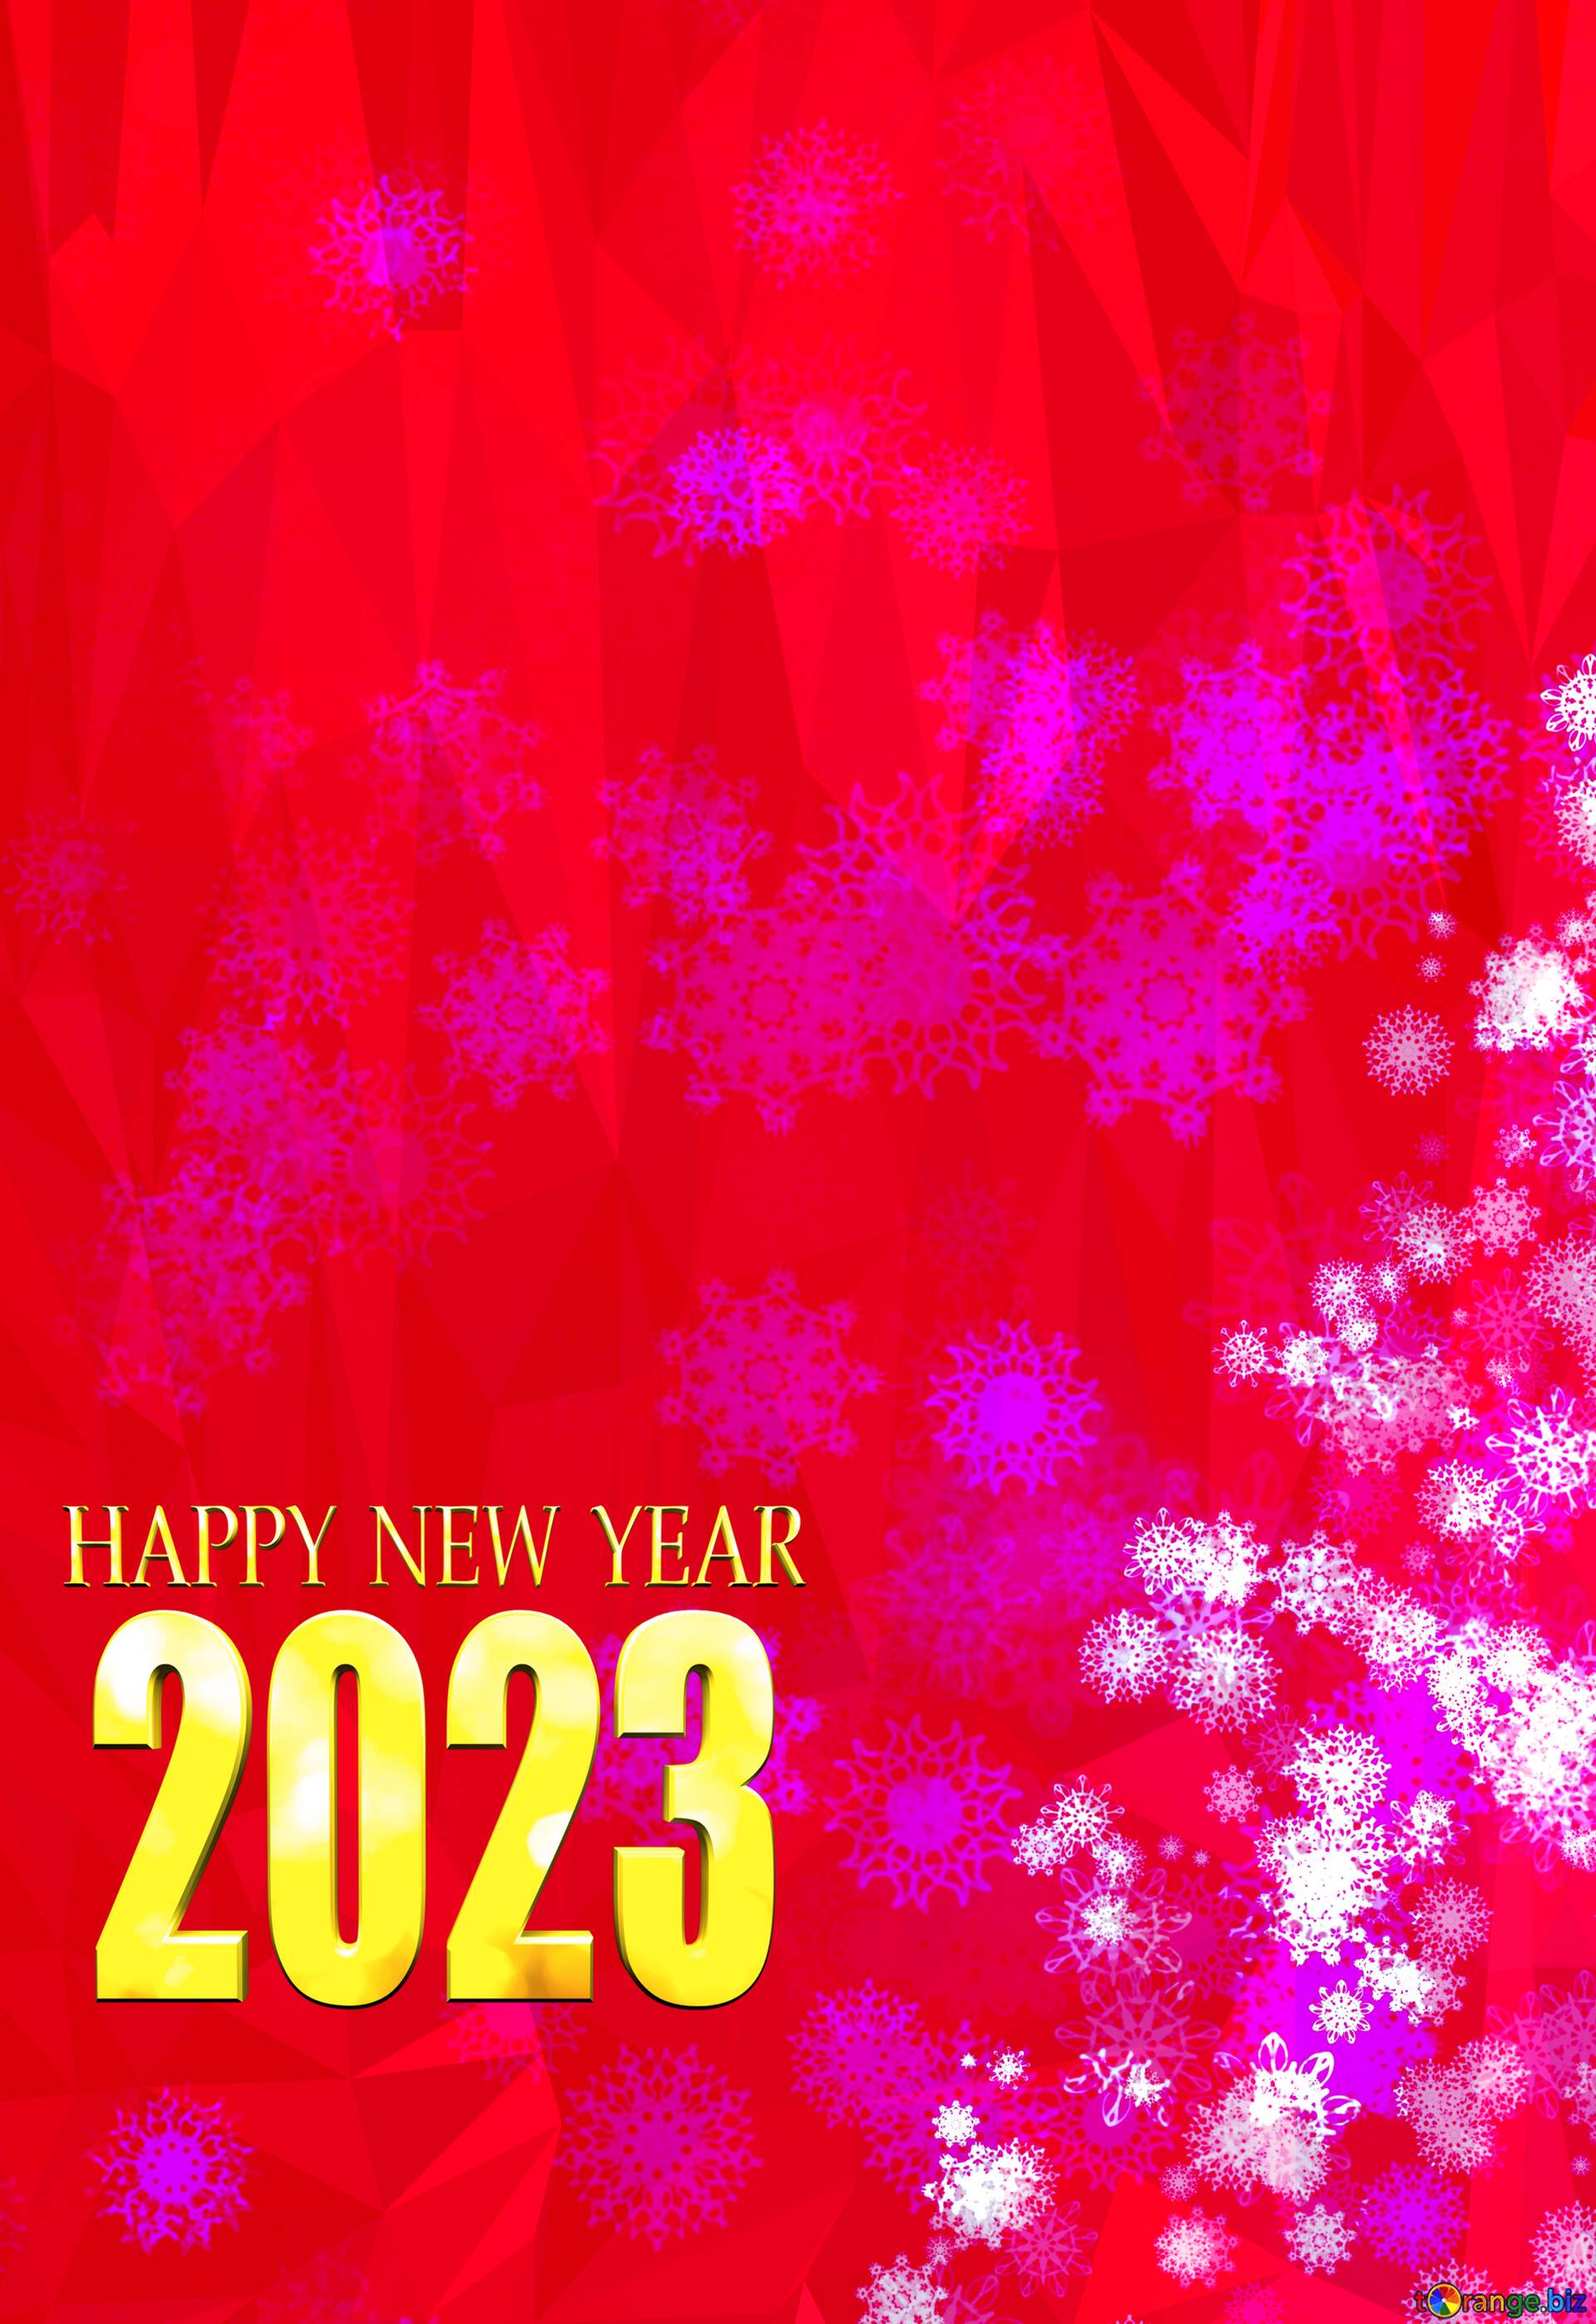 Download Free Picture Pink New Year 2023 Polygonal Abstract Geometrical Background With Triangles On CC BY License Free Image Stock TOrange.biz Fx №204457